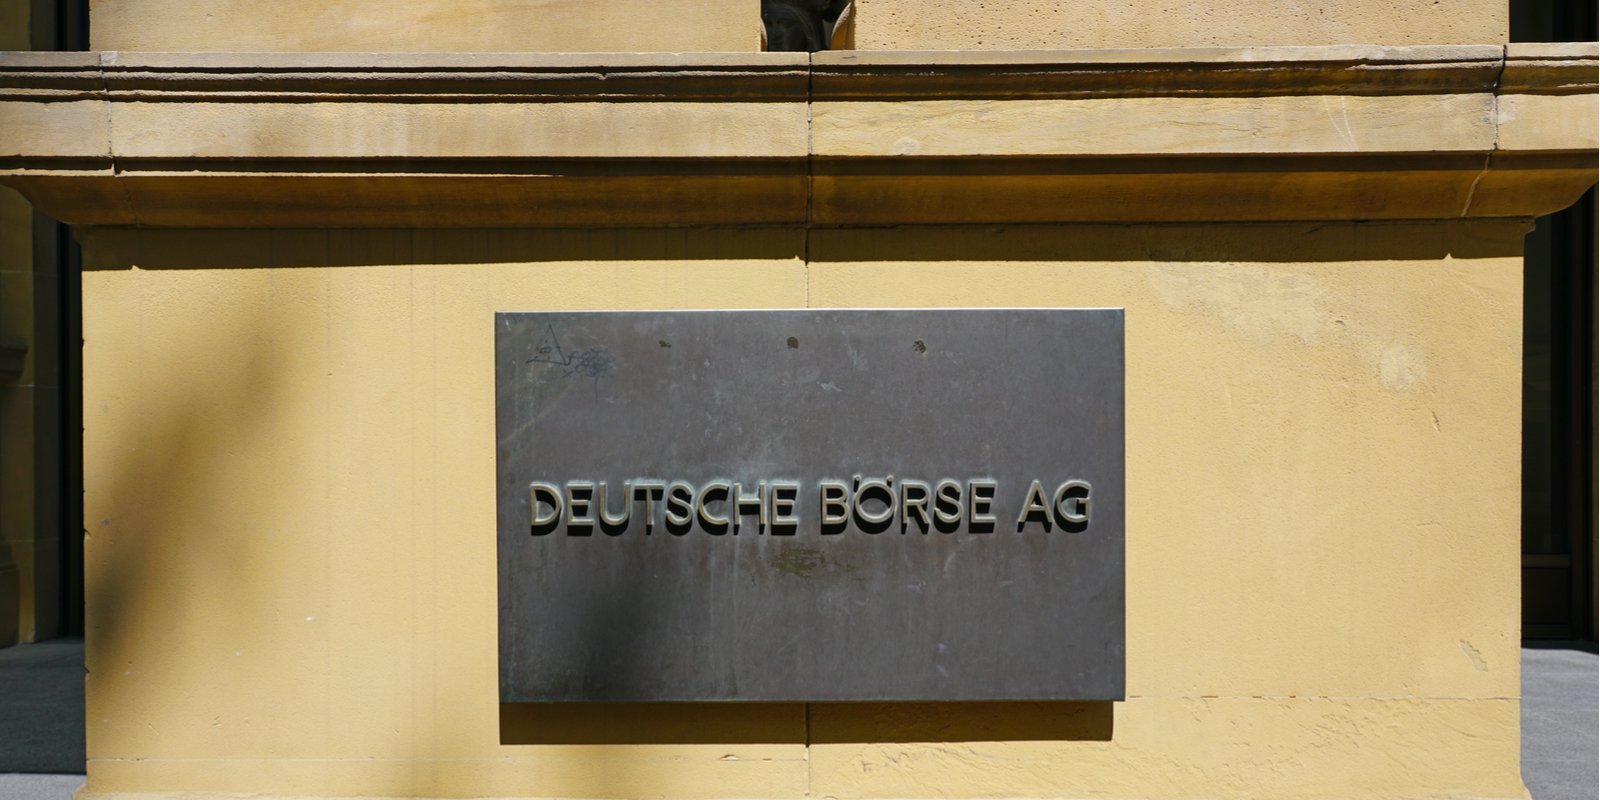 German Derivatives Exchange Rumored to Be Launching Crypto Futures